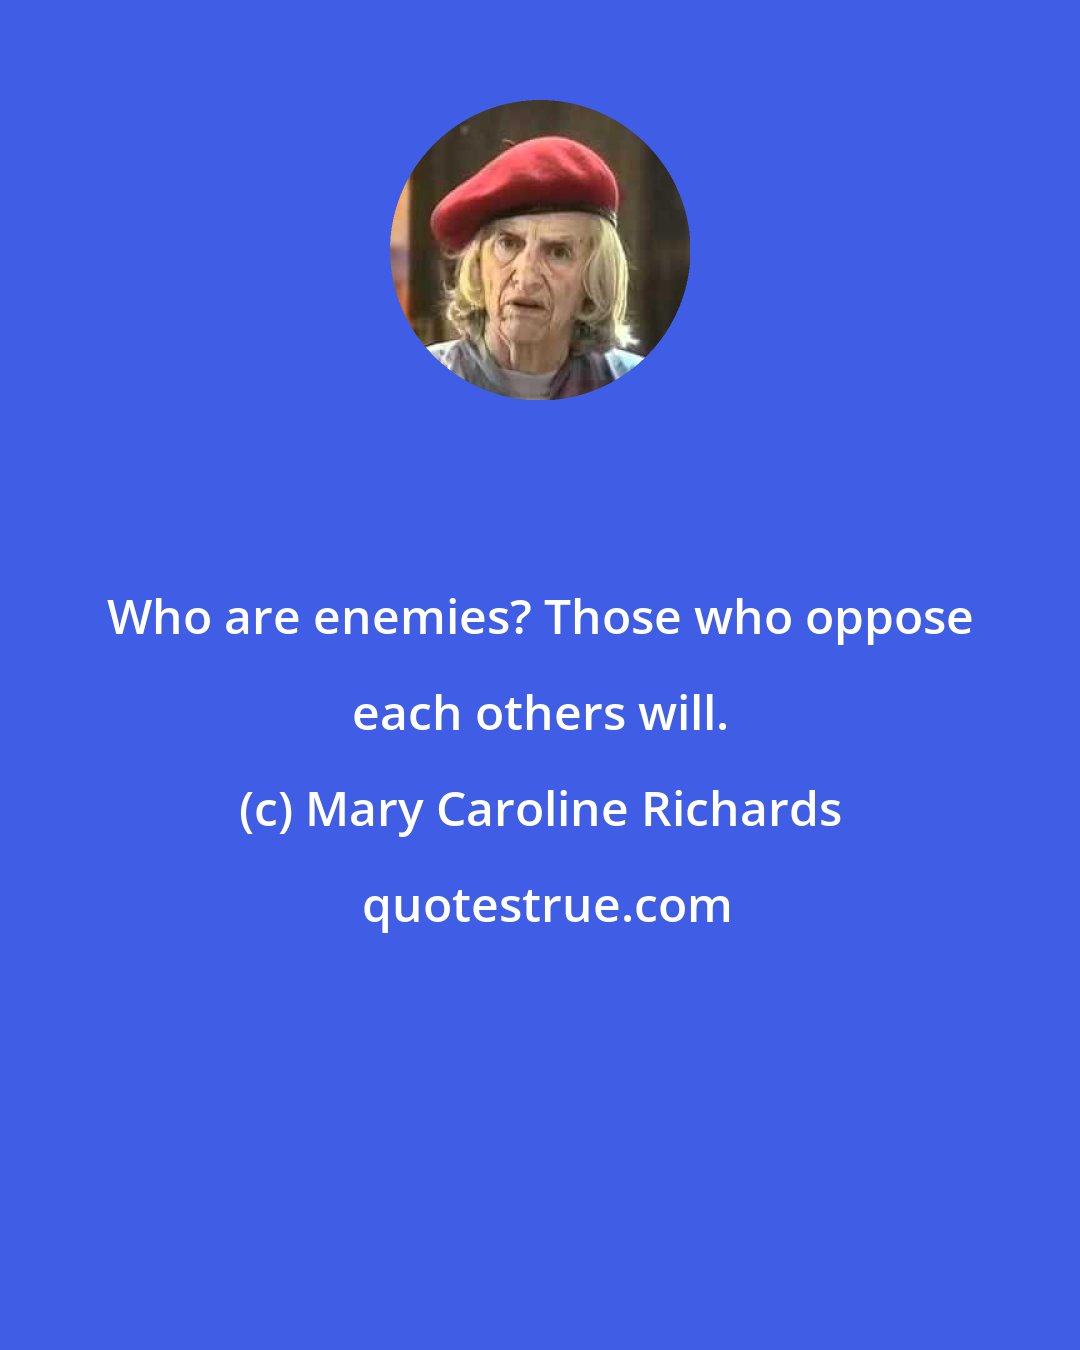 Mary Caroline Richards: Who are enemies? Those who oppose each others will.